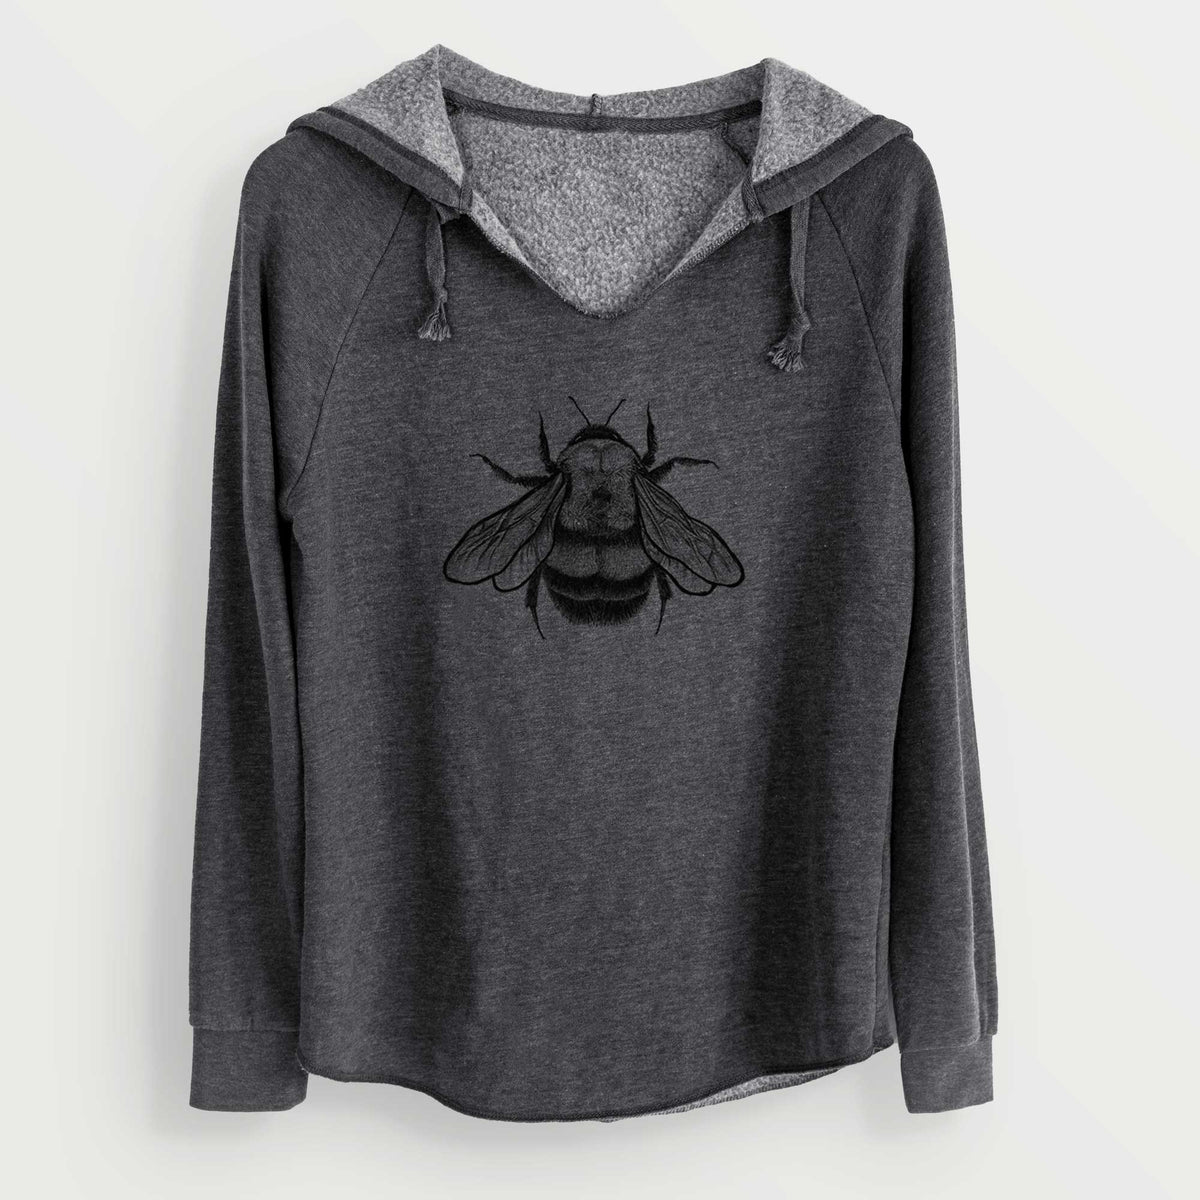 Bombus Affinis - Rusty-Patched Bumble Bee - Cali Wave Hooded Sweatshirt